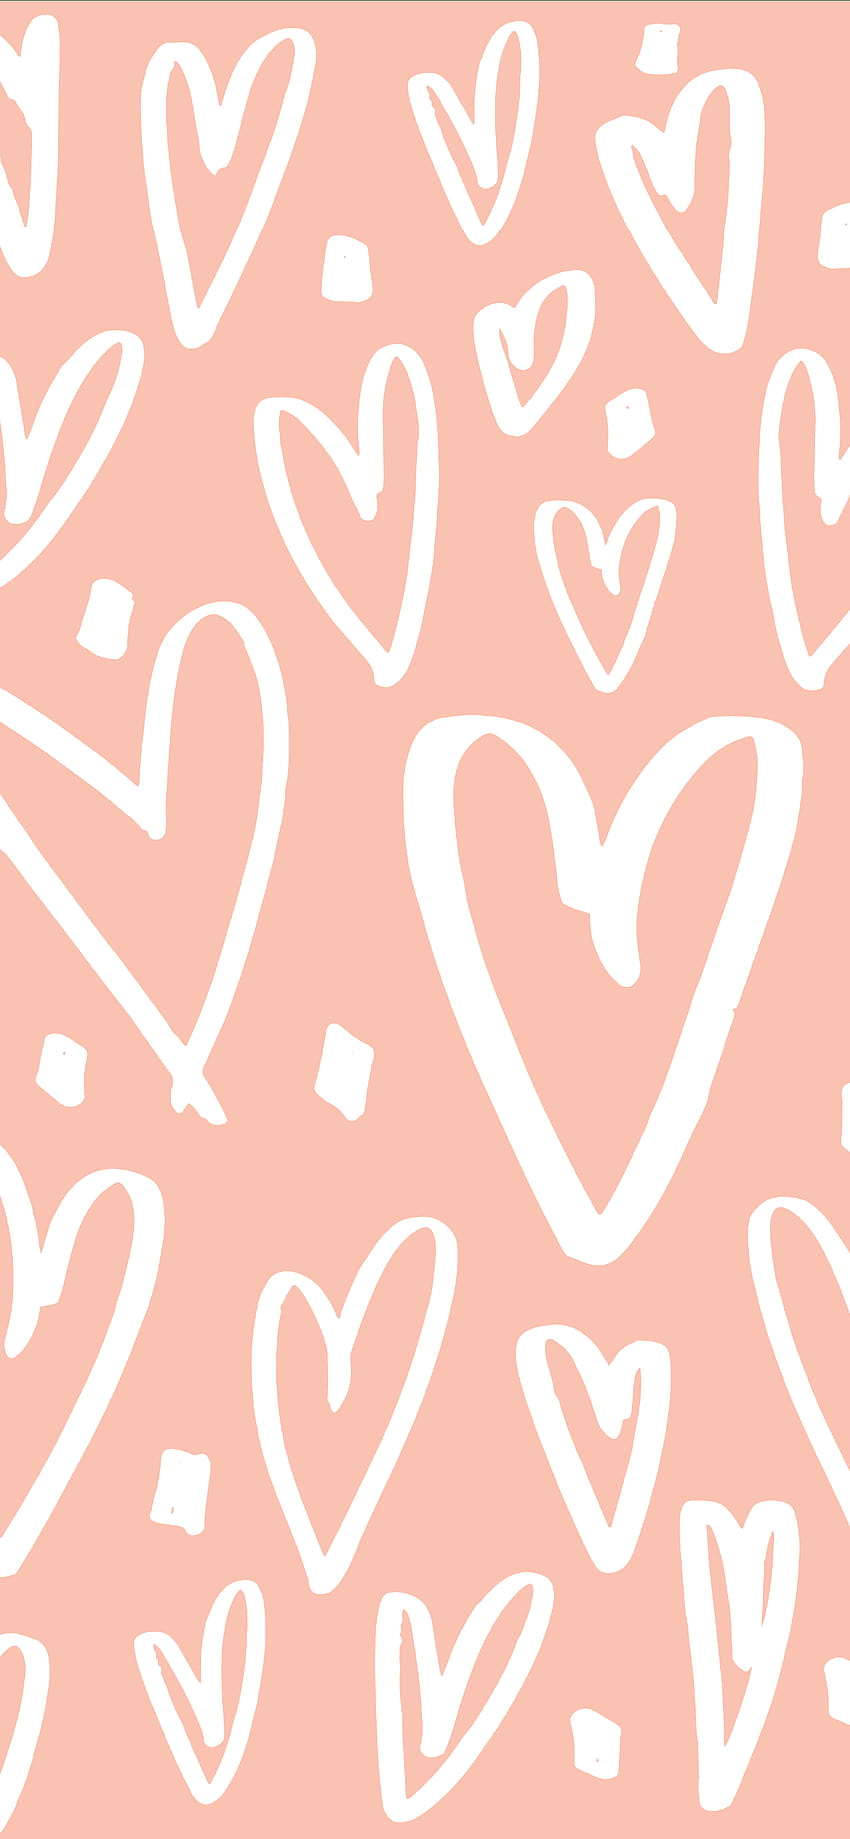 Aesthetic Valentines Day posted by Ethan Thompson, cute valentine day HD  phone wallpaper